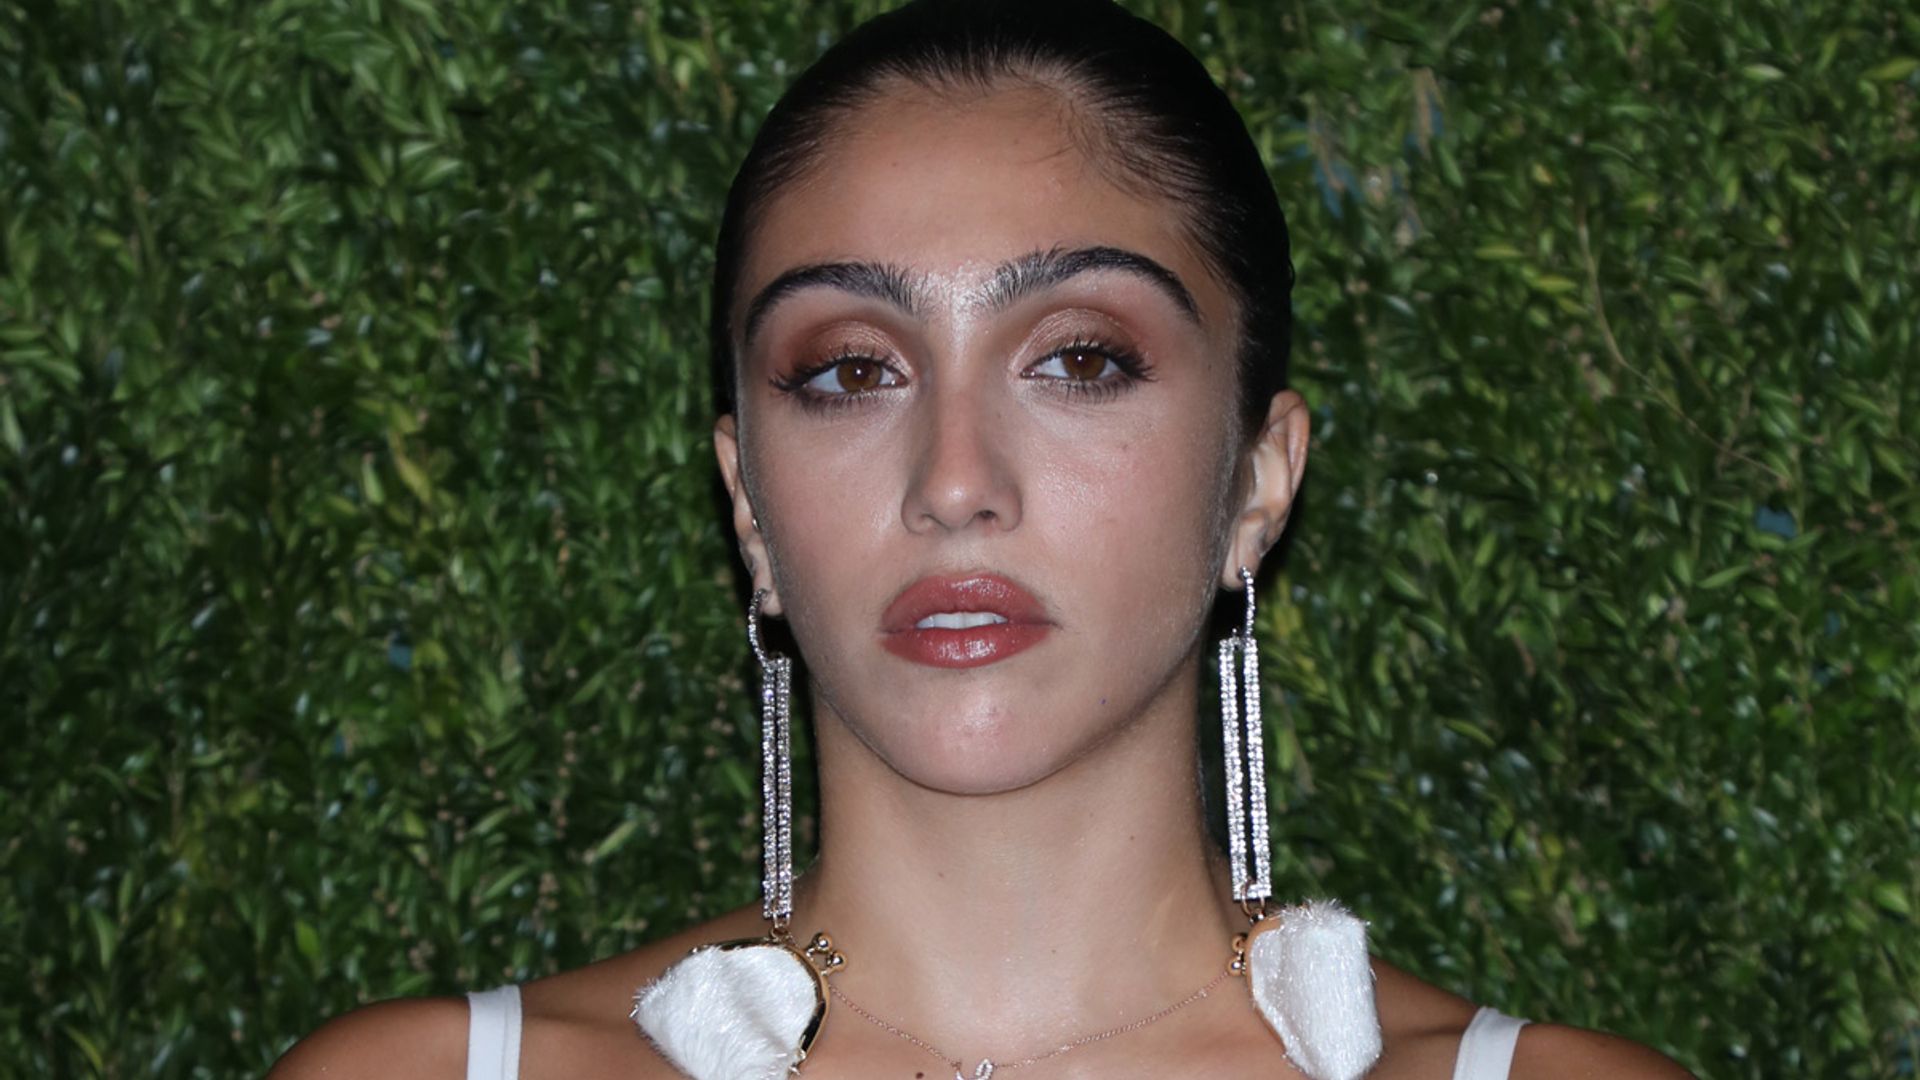 Madonna S Daughter Lourdes Leon Stuns In Very Risqu Nude Outfit Hello